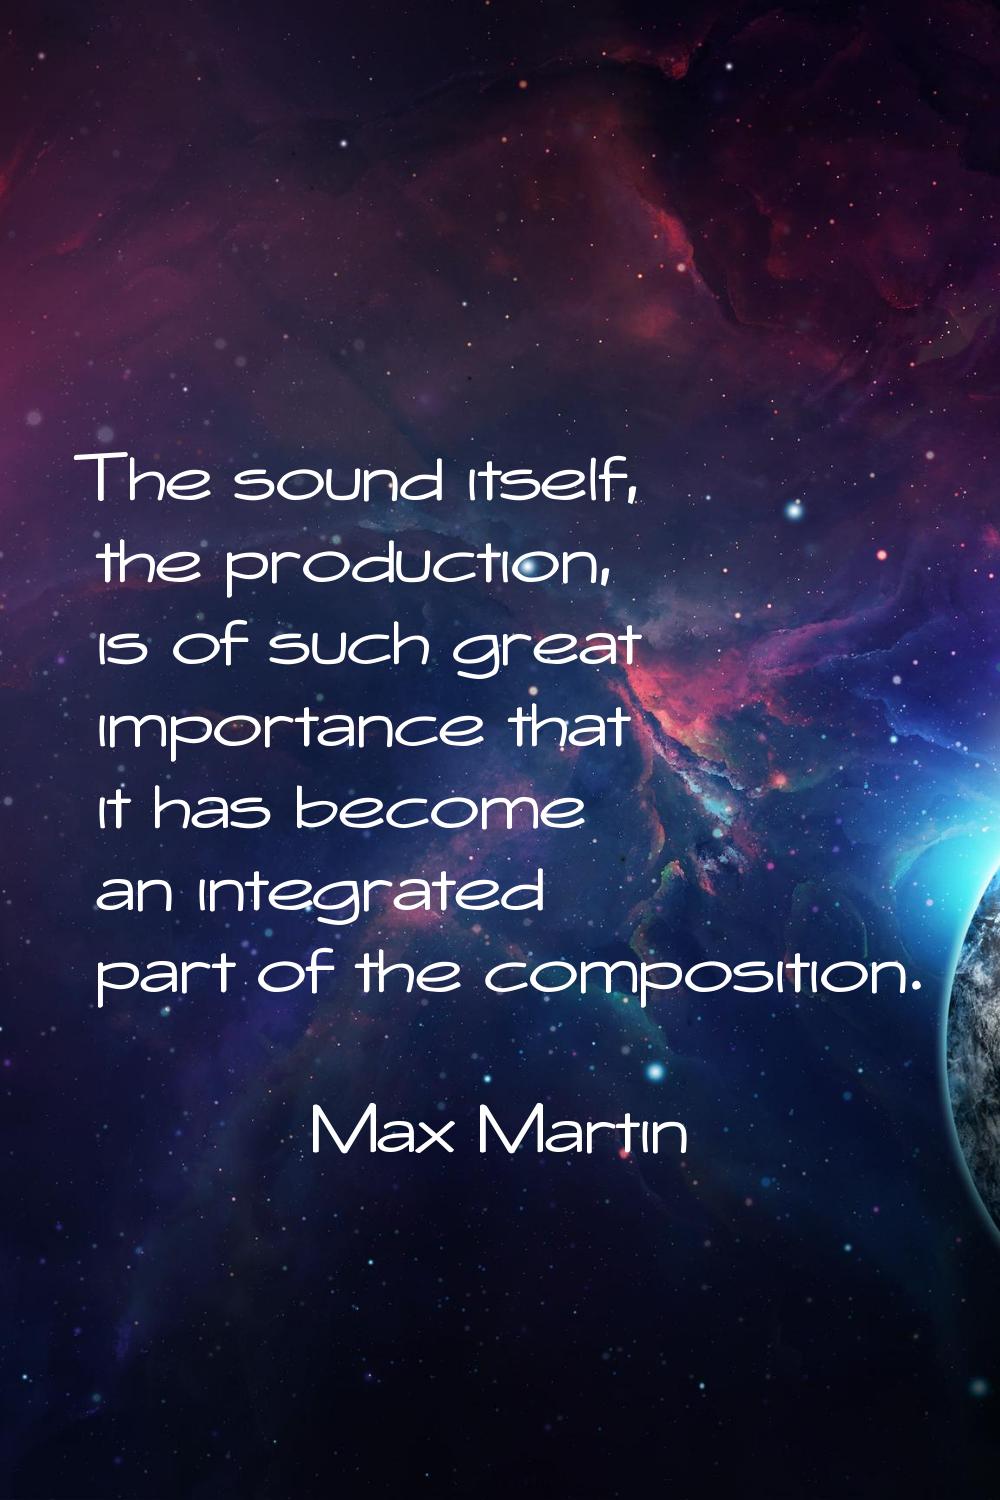 The sound itself, the production, is of such great importance that it has become an integrated part